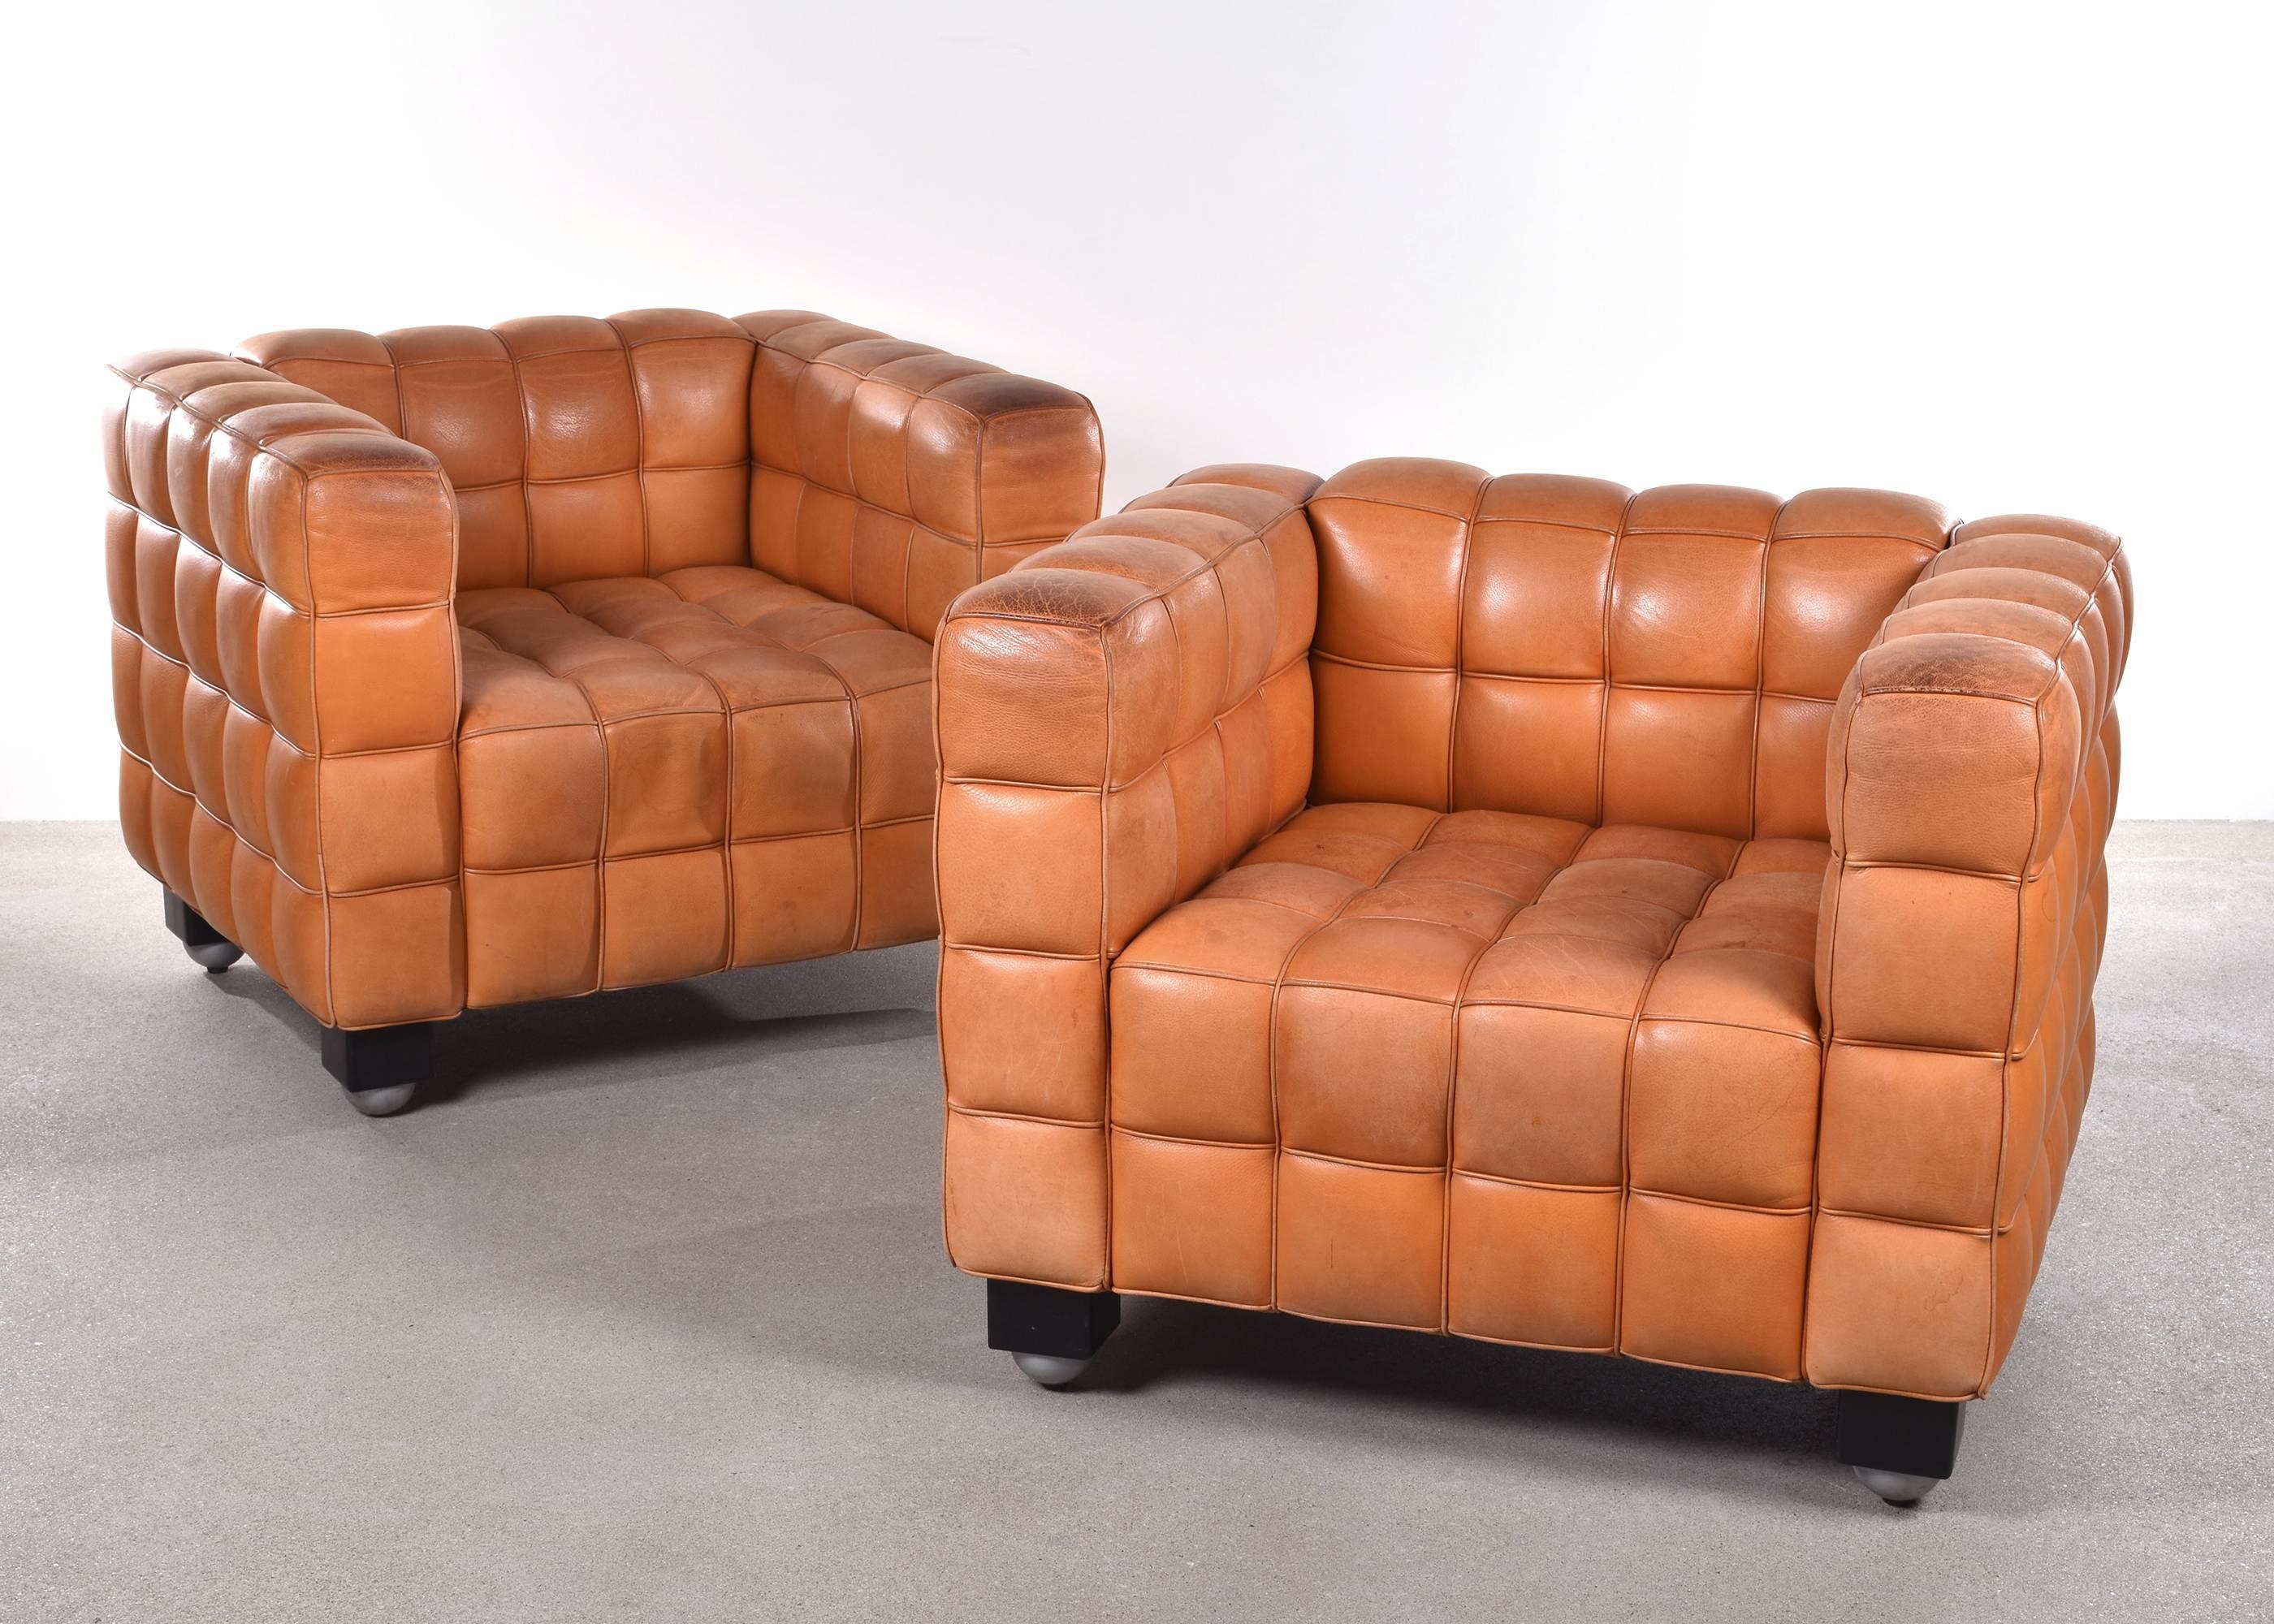 Great geometric armchairs from Josef Hoffmann, designed in 1910. Cognac leather with lot's of life and patina. Brown patinated leather. Both chairs are signed with manufacturer's label.

Free shipping for European destinations!

We strive for a